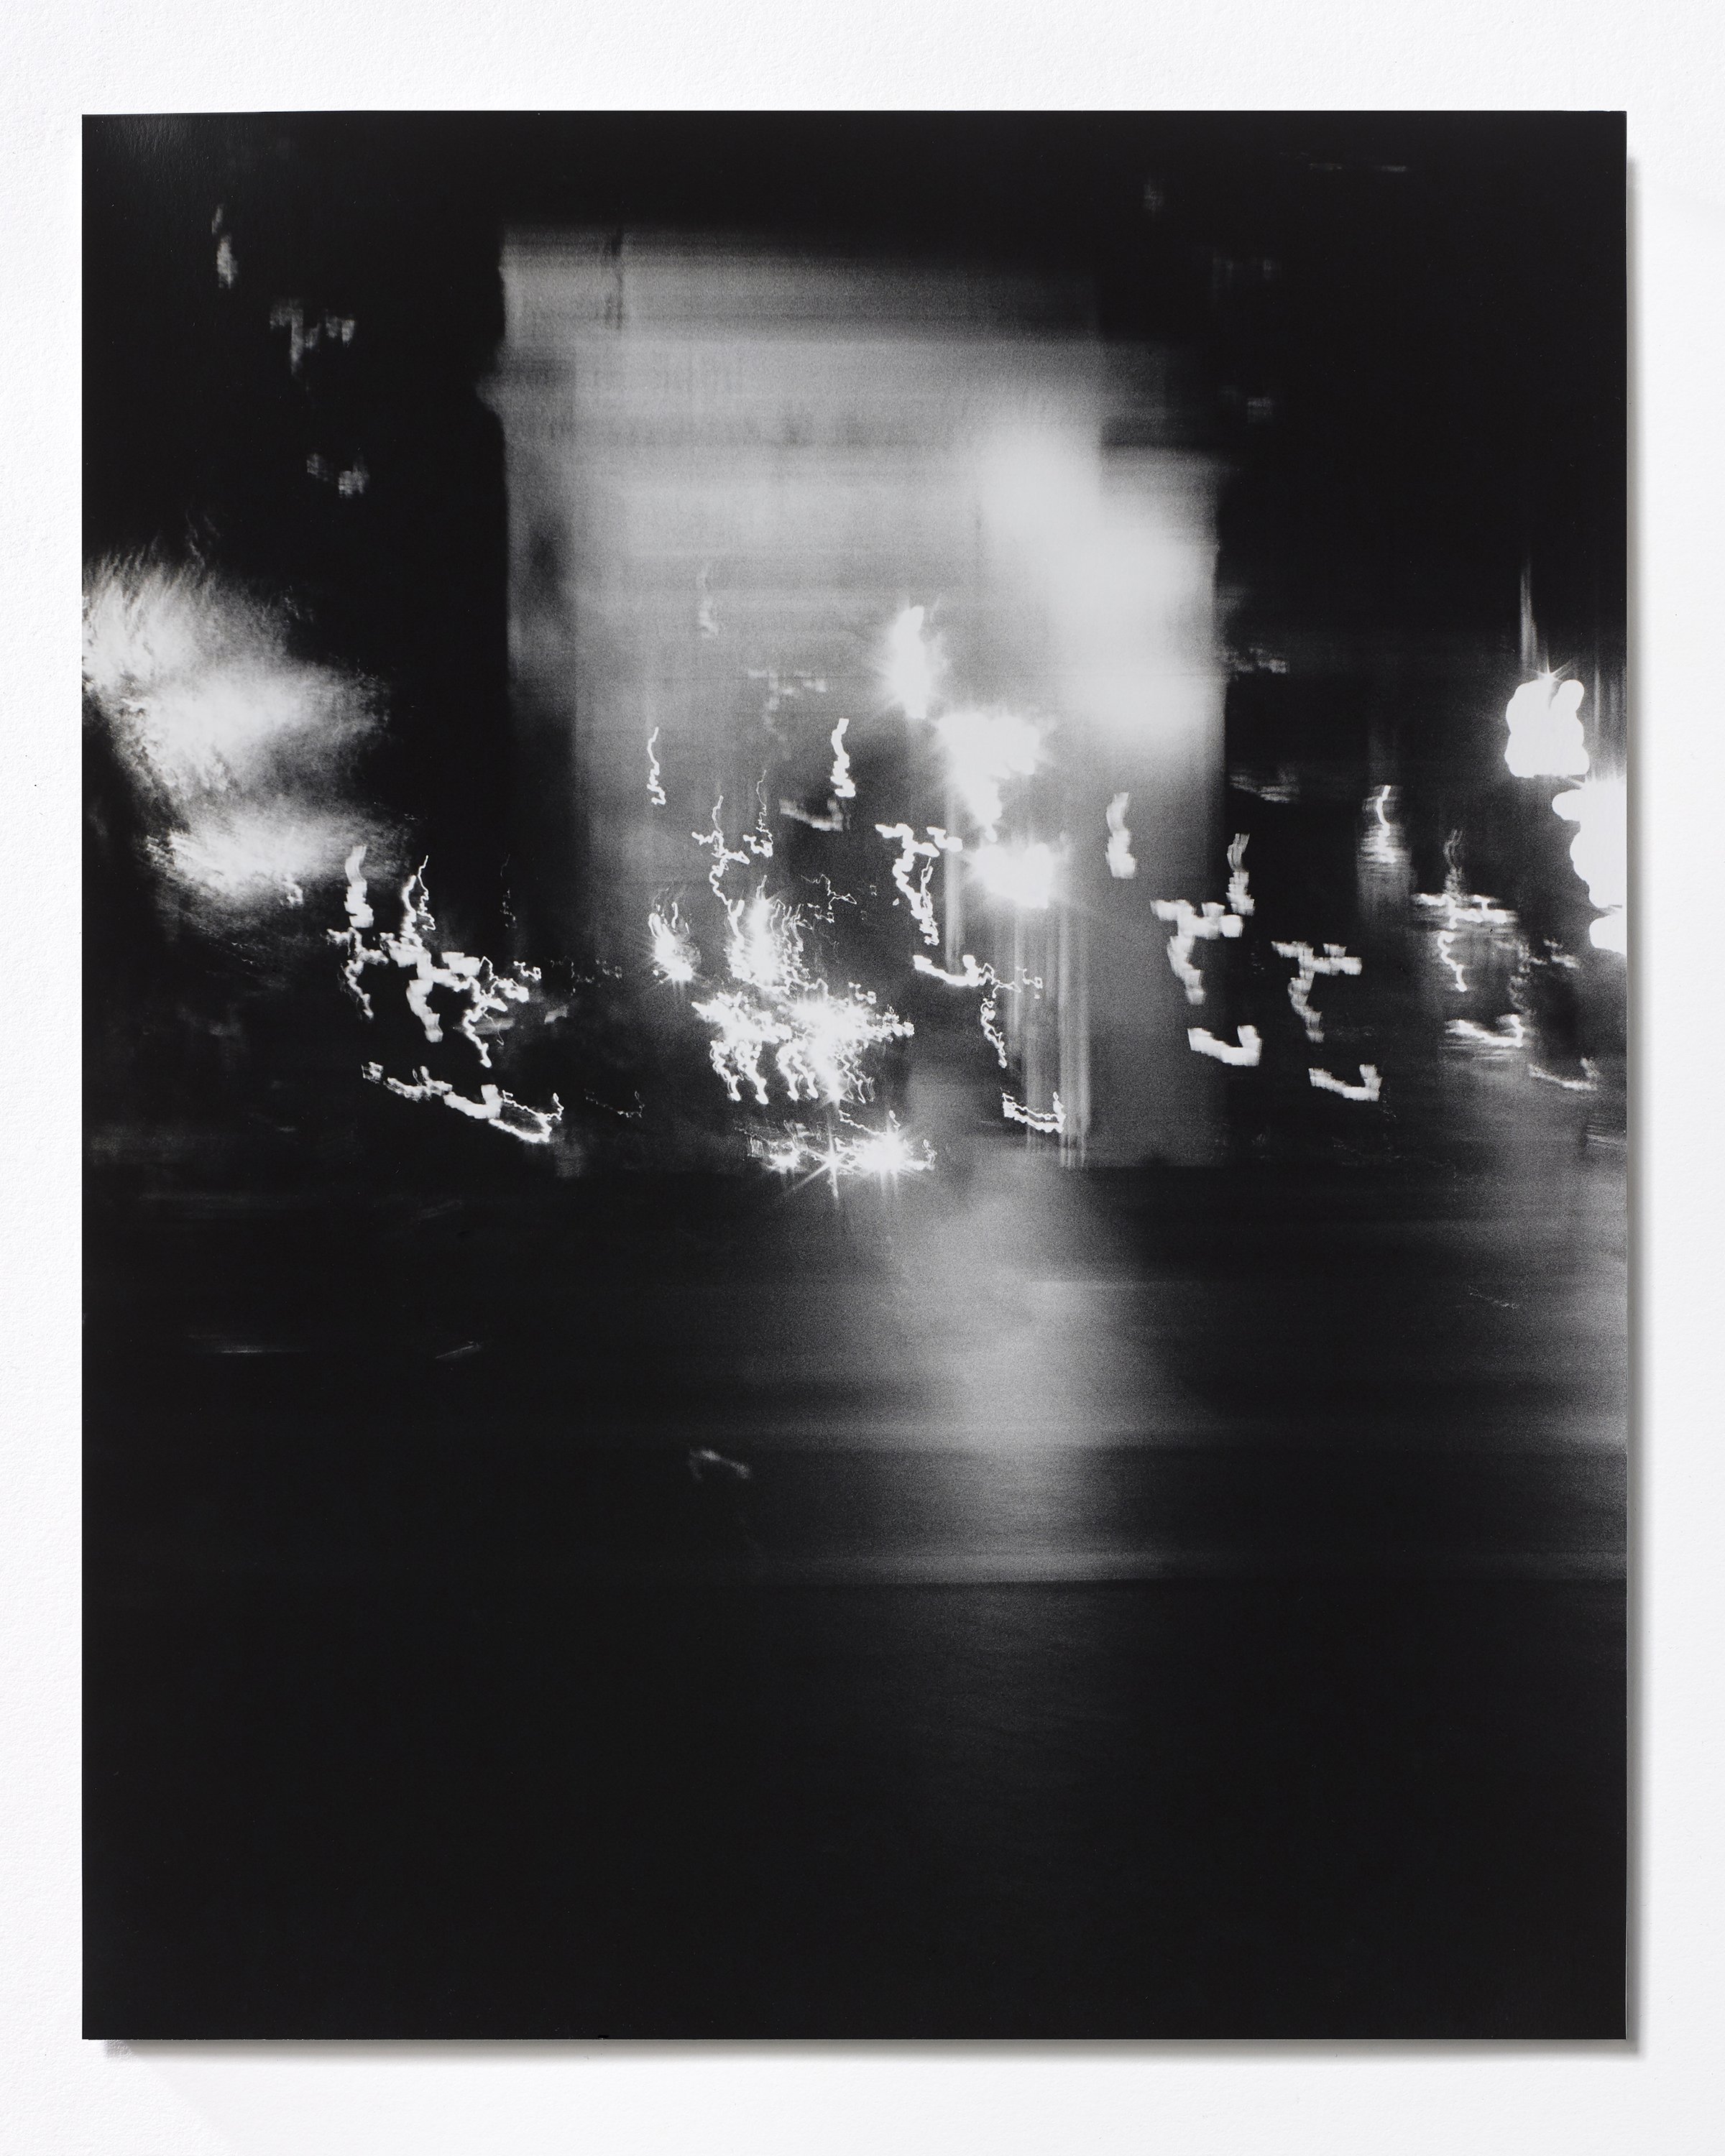 "Fifth Avenue and Eighth Street, facing South, 9:11pm"